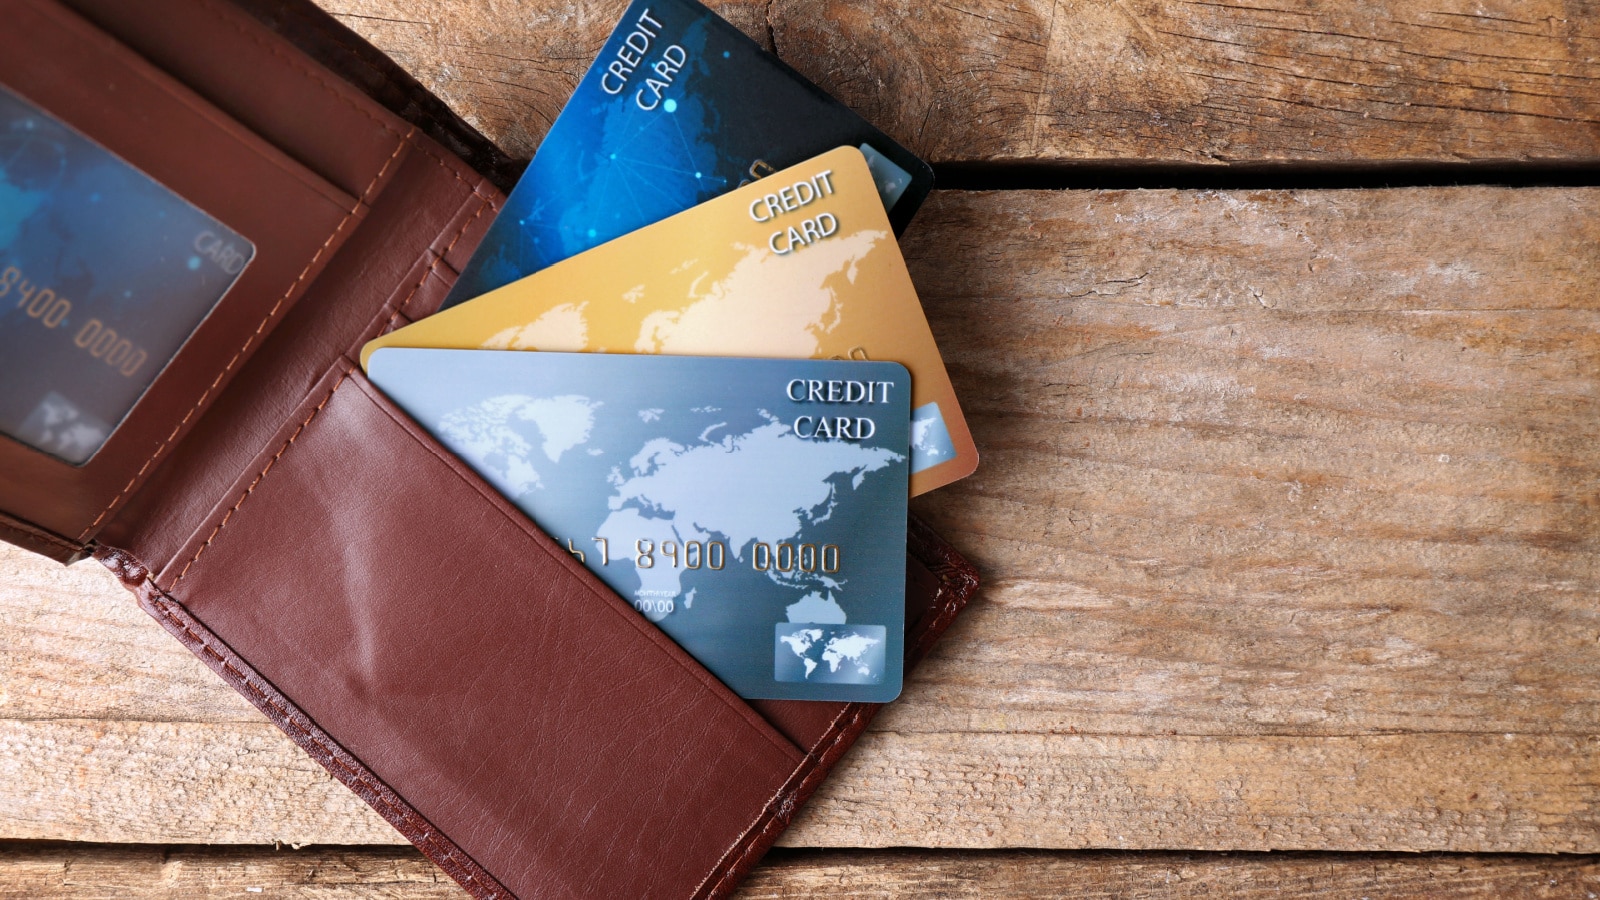 Credit cards in leather wallet on wooden background